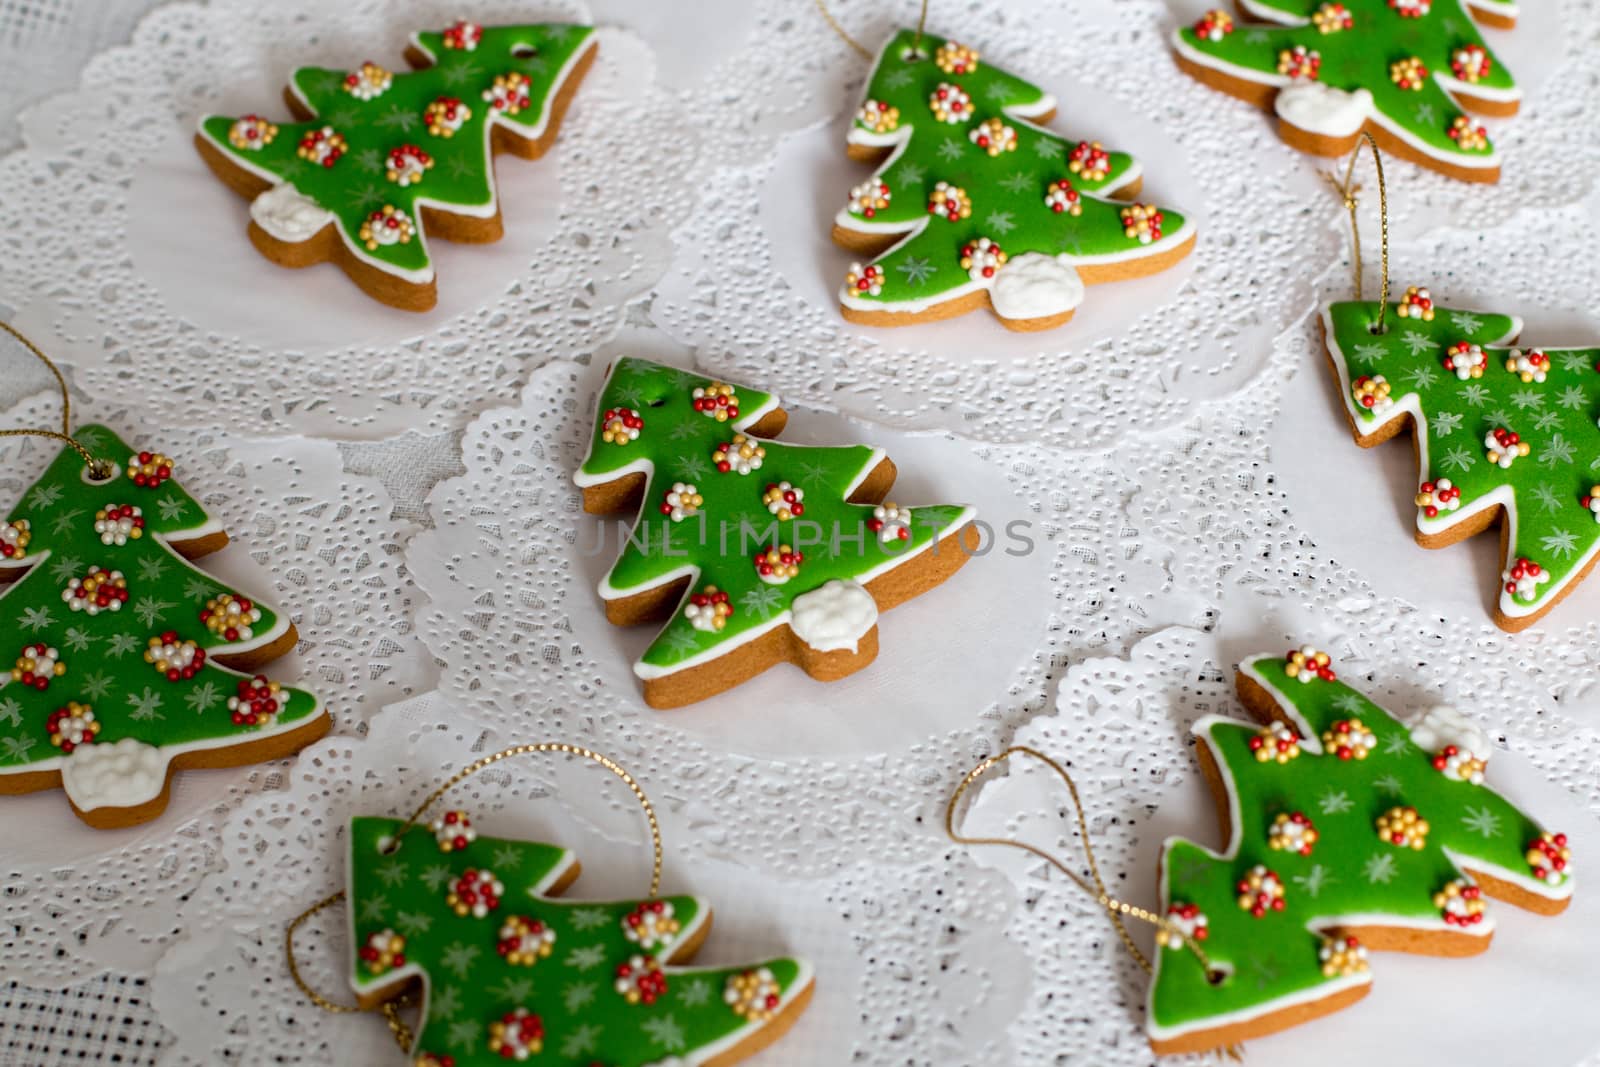 Painted gingerbread in the shape of Christmas tree on a white napkin background. Christmas trees cookies - colorful icing decoration